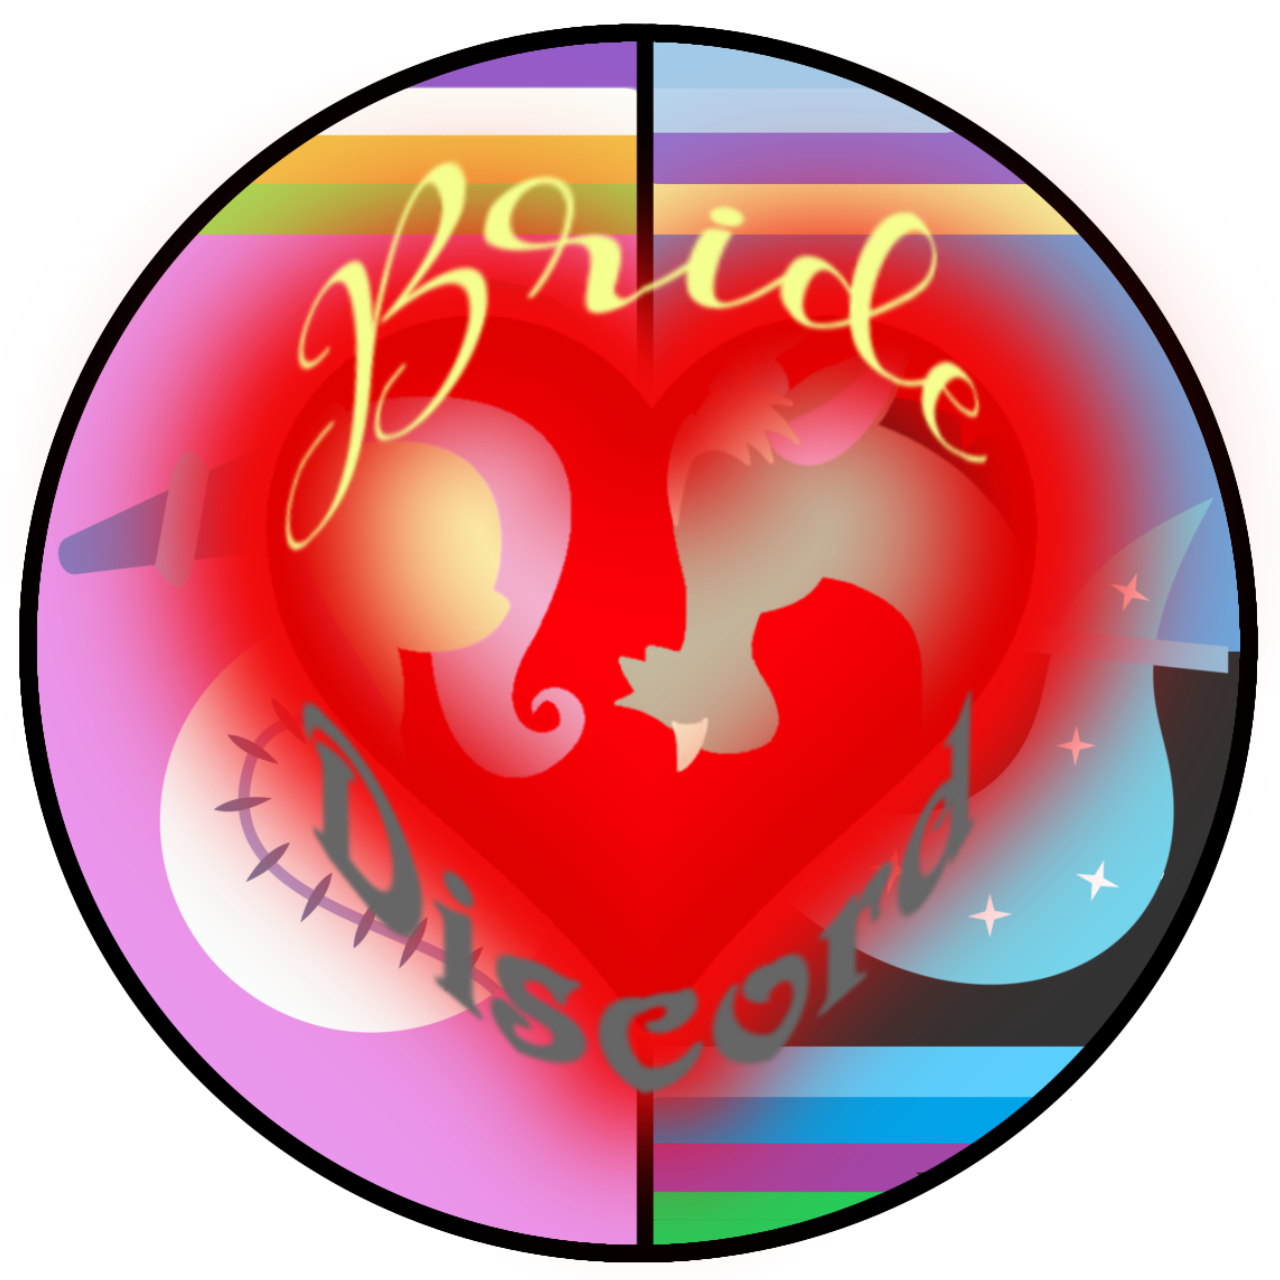 bride of discord the date